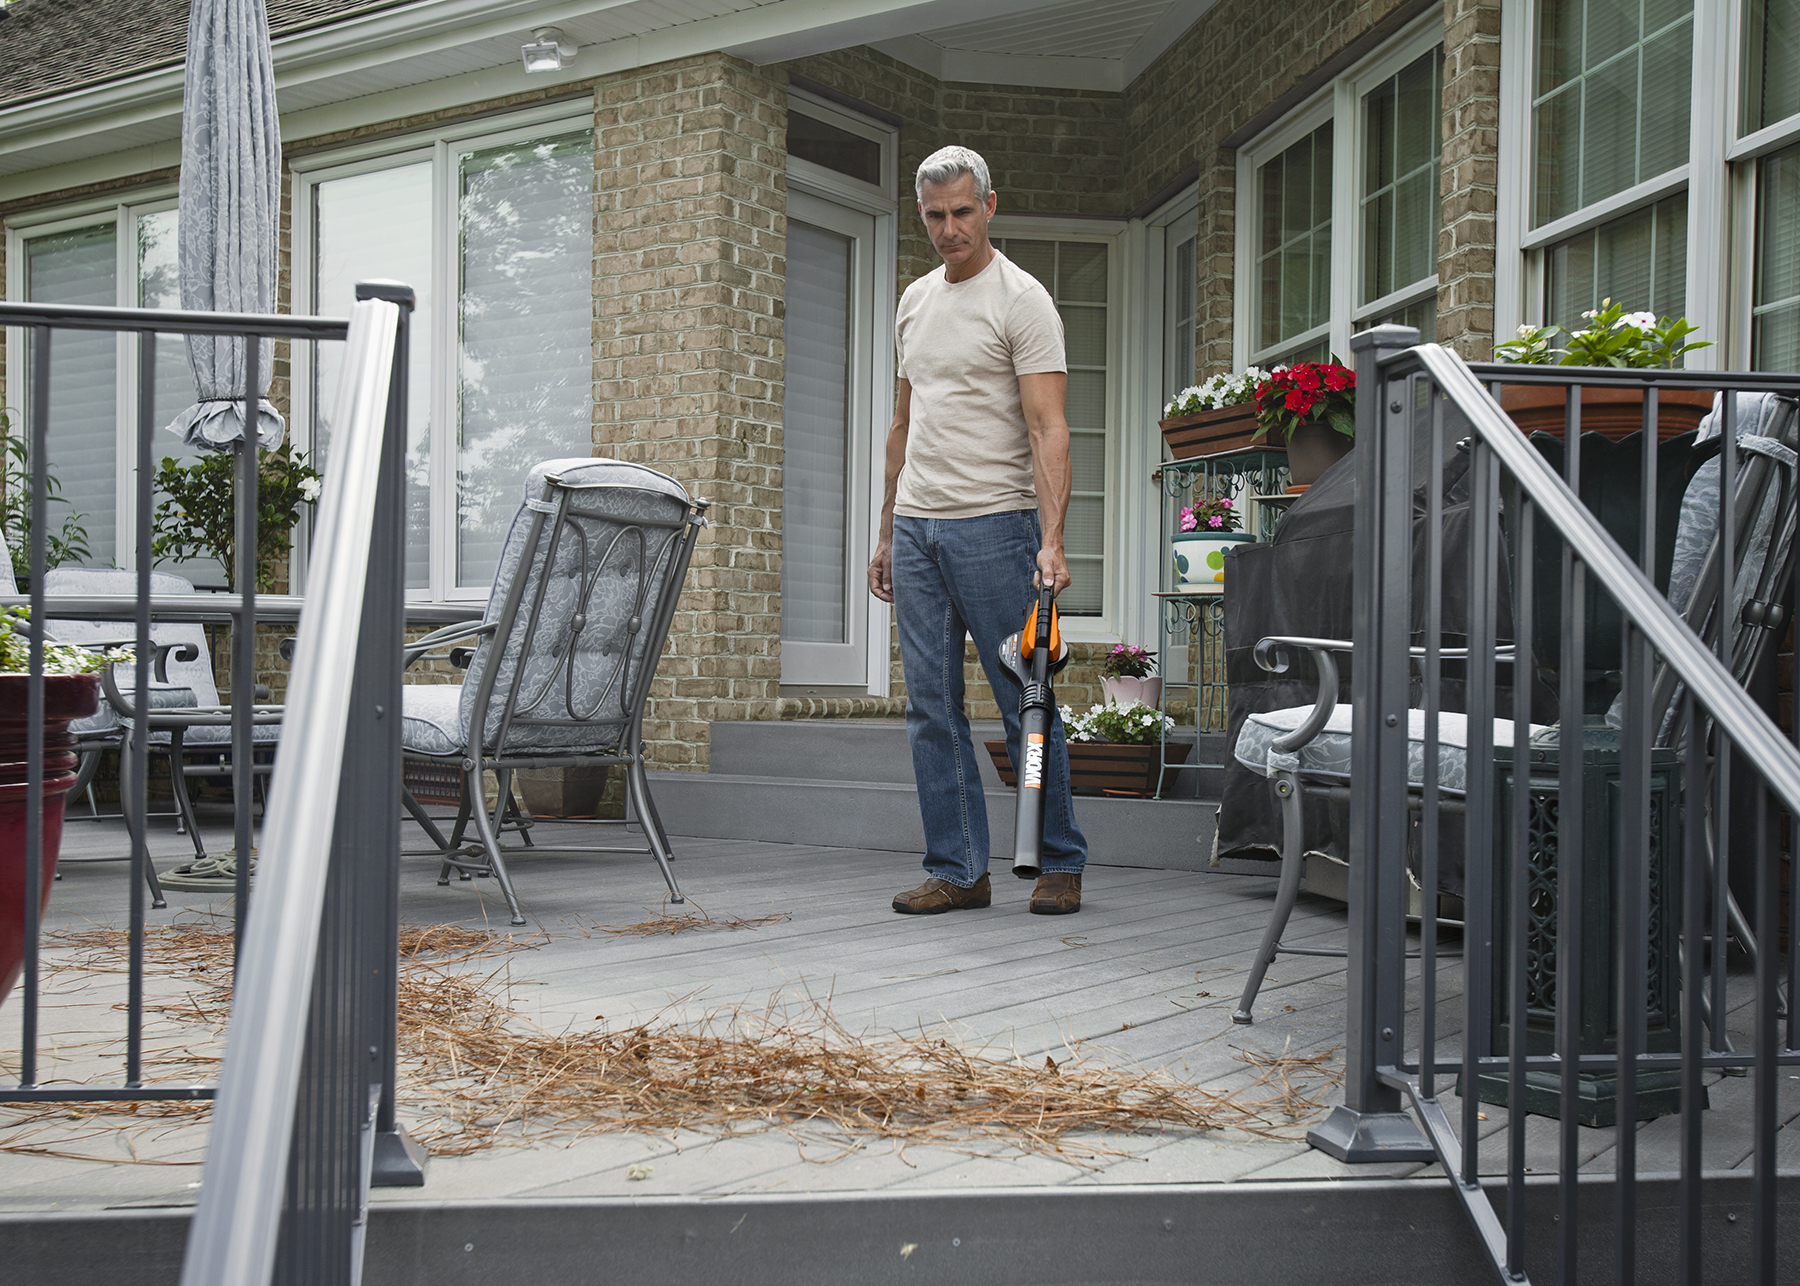 WORX 32V Blower/Sweeper clears porch of dirt and debris